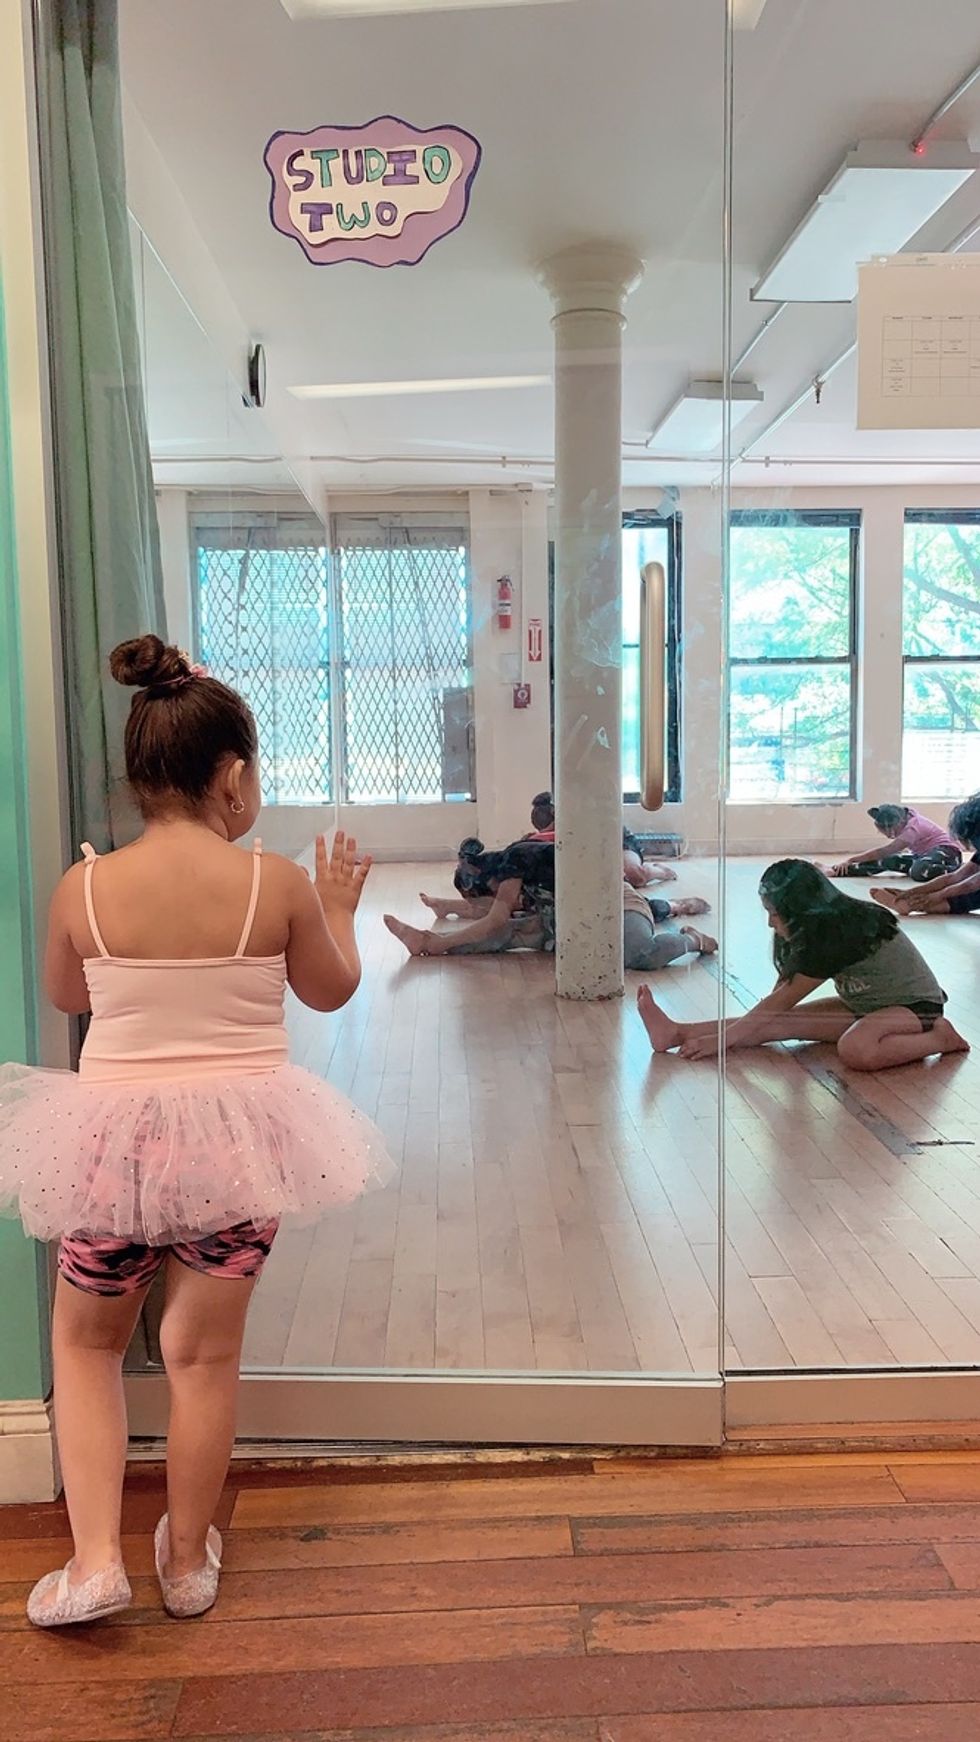 A young girl in a tutu looks through a glass door at a class in session, with students stretching on the floor